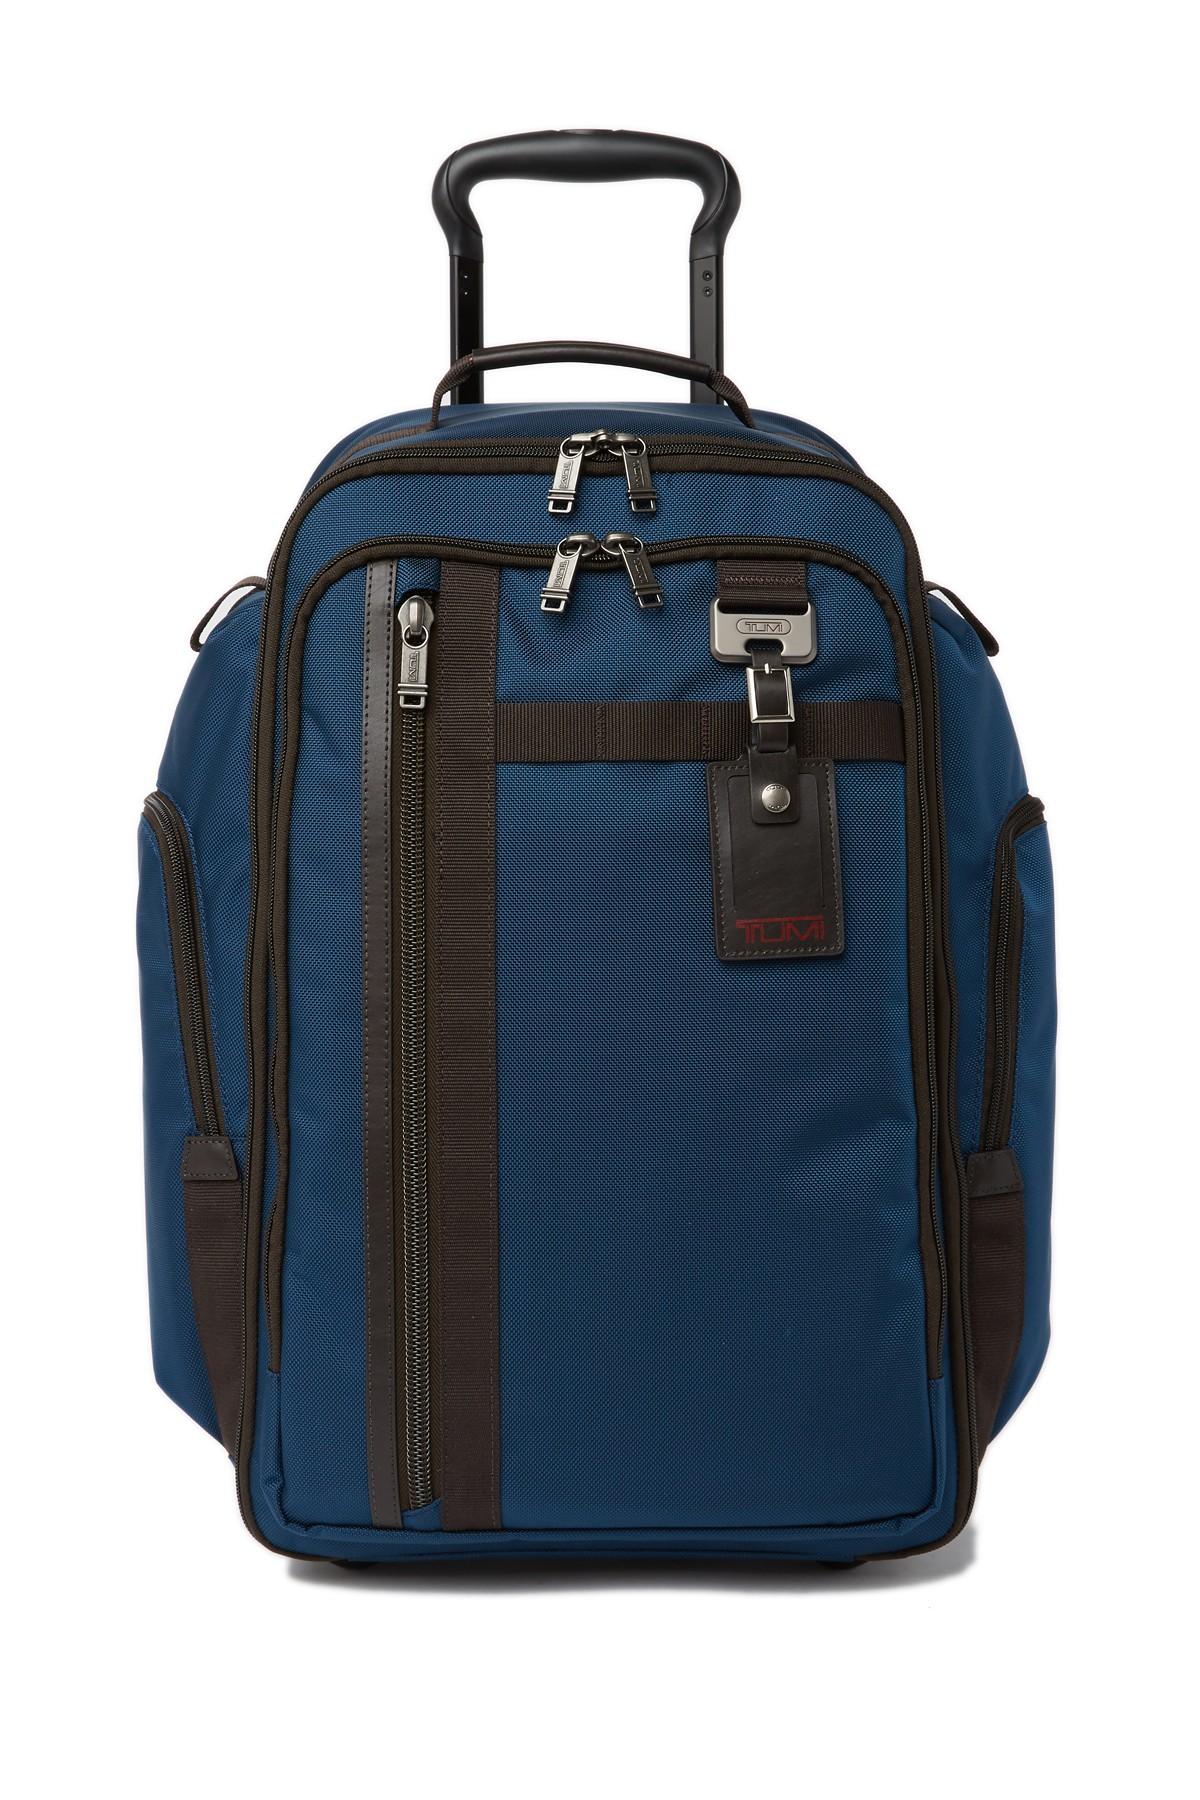 Tumi Synthetic Ashworth Wheeled Backpack in Blue for Men - Lyst